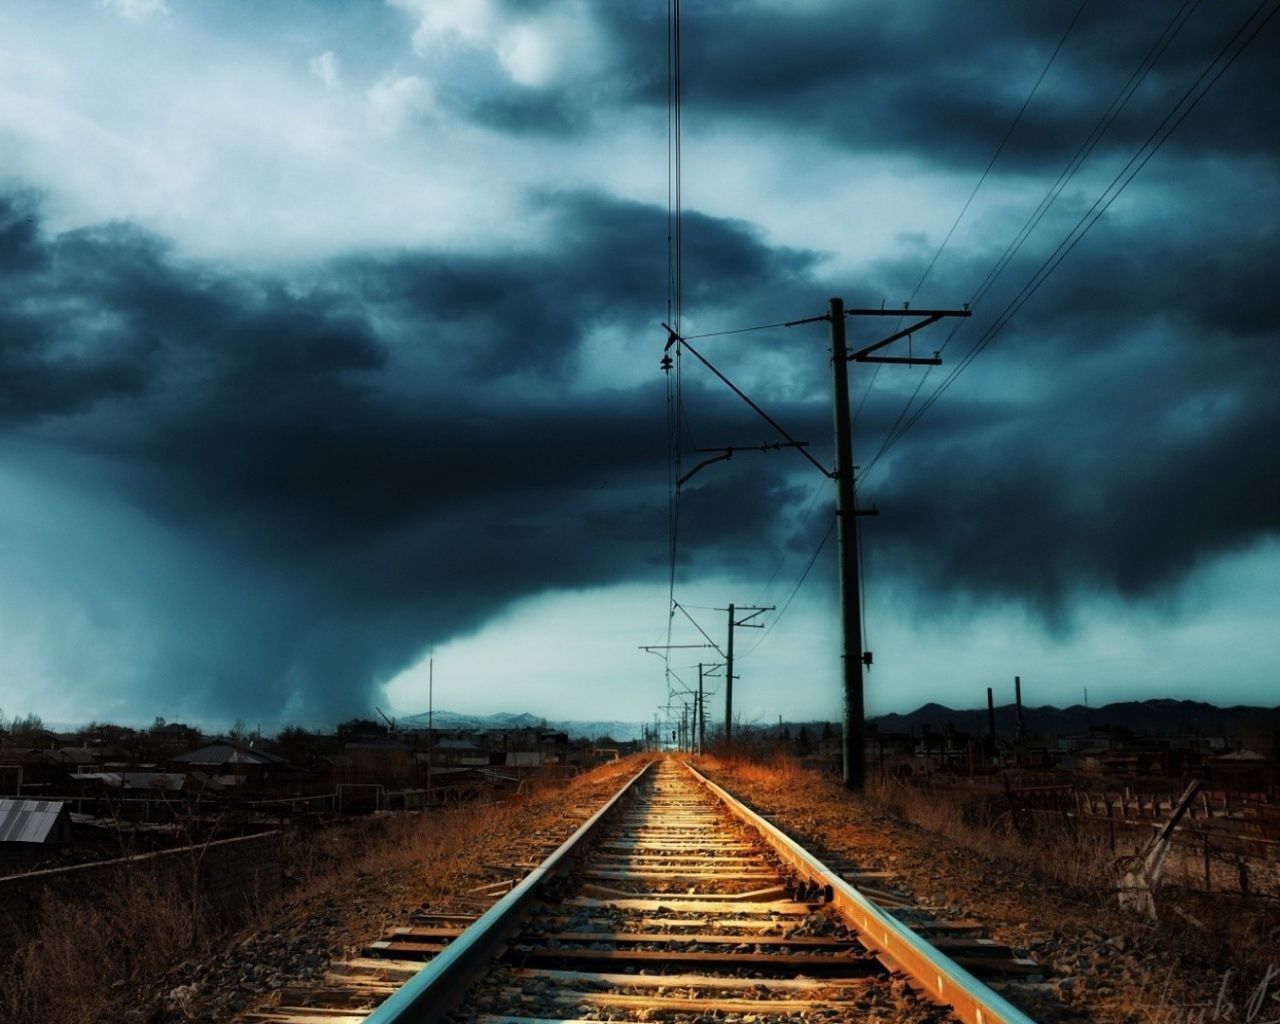 A storm approaches over a railroad track - 1280x1024